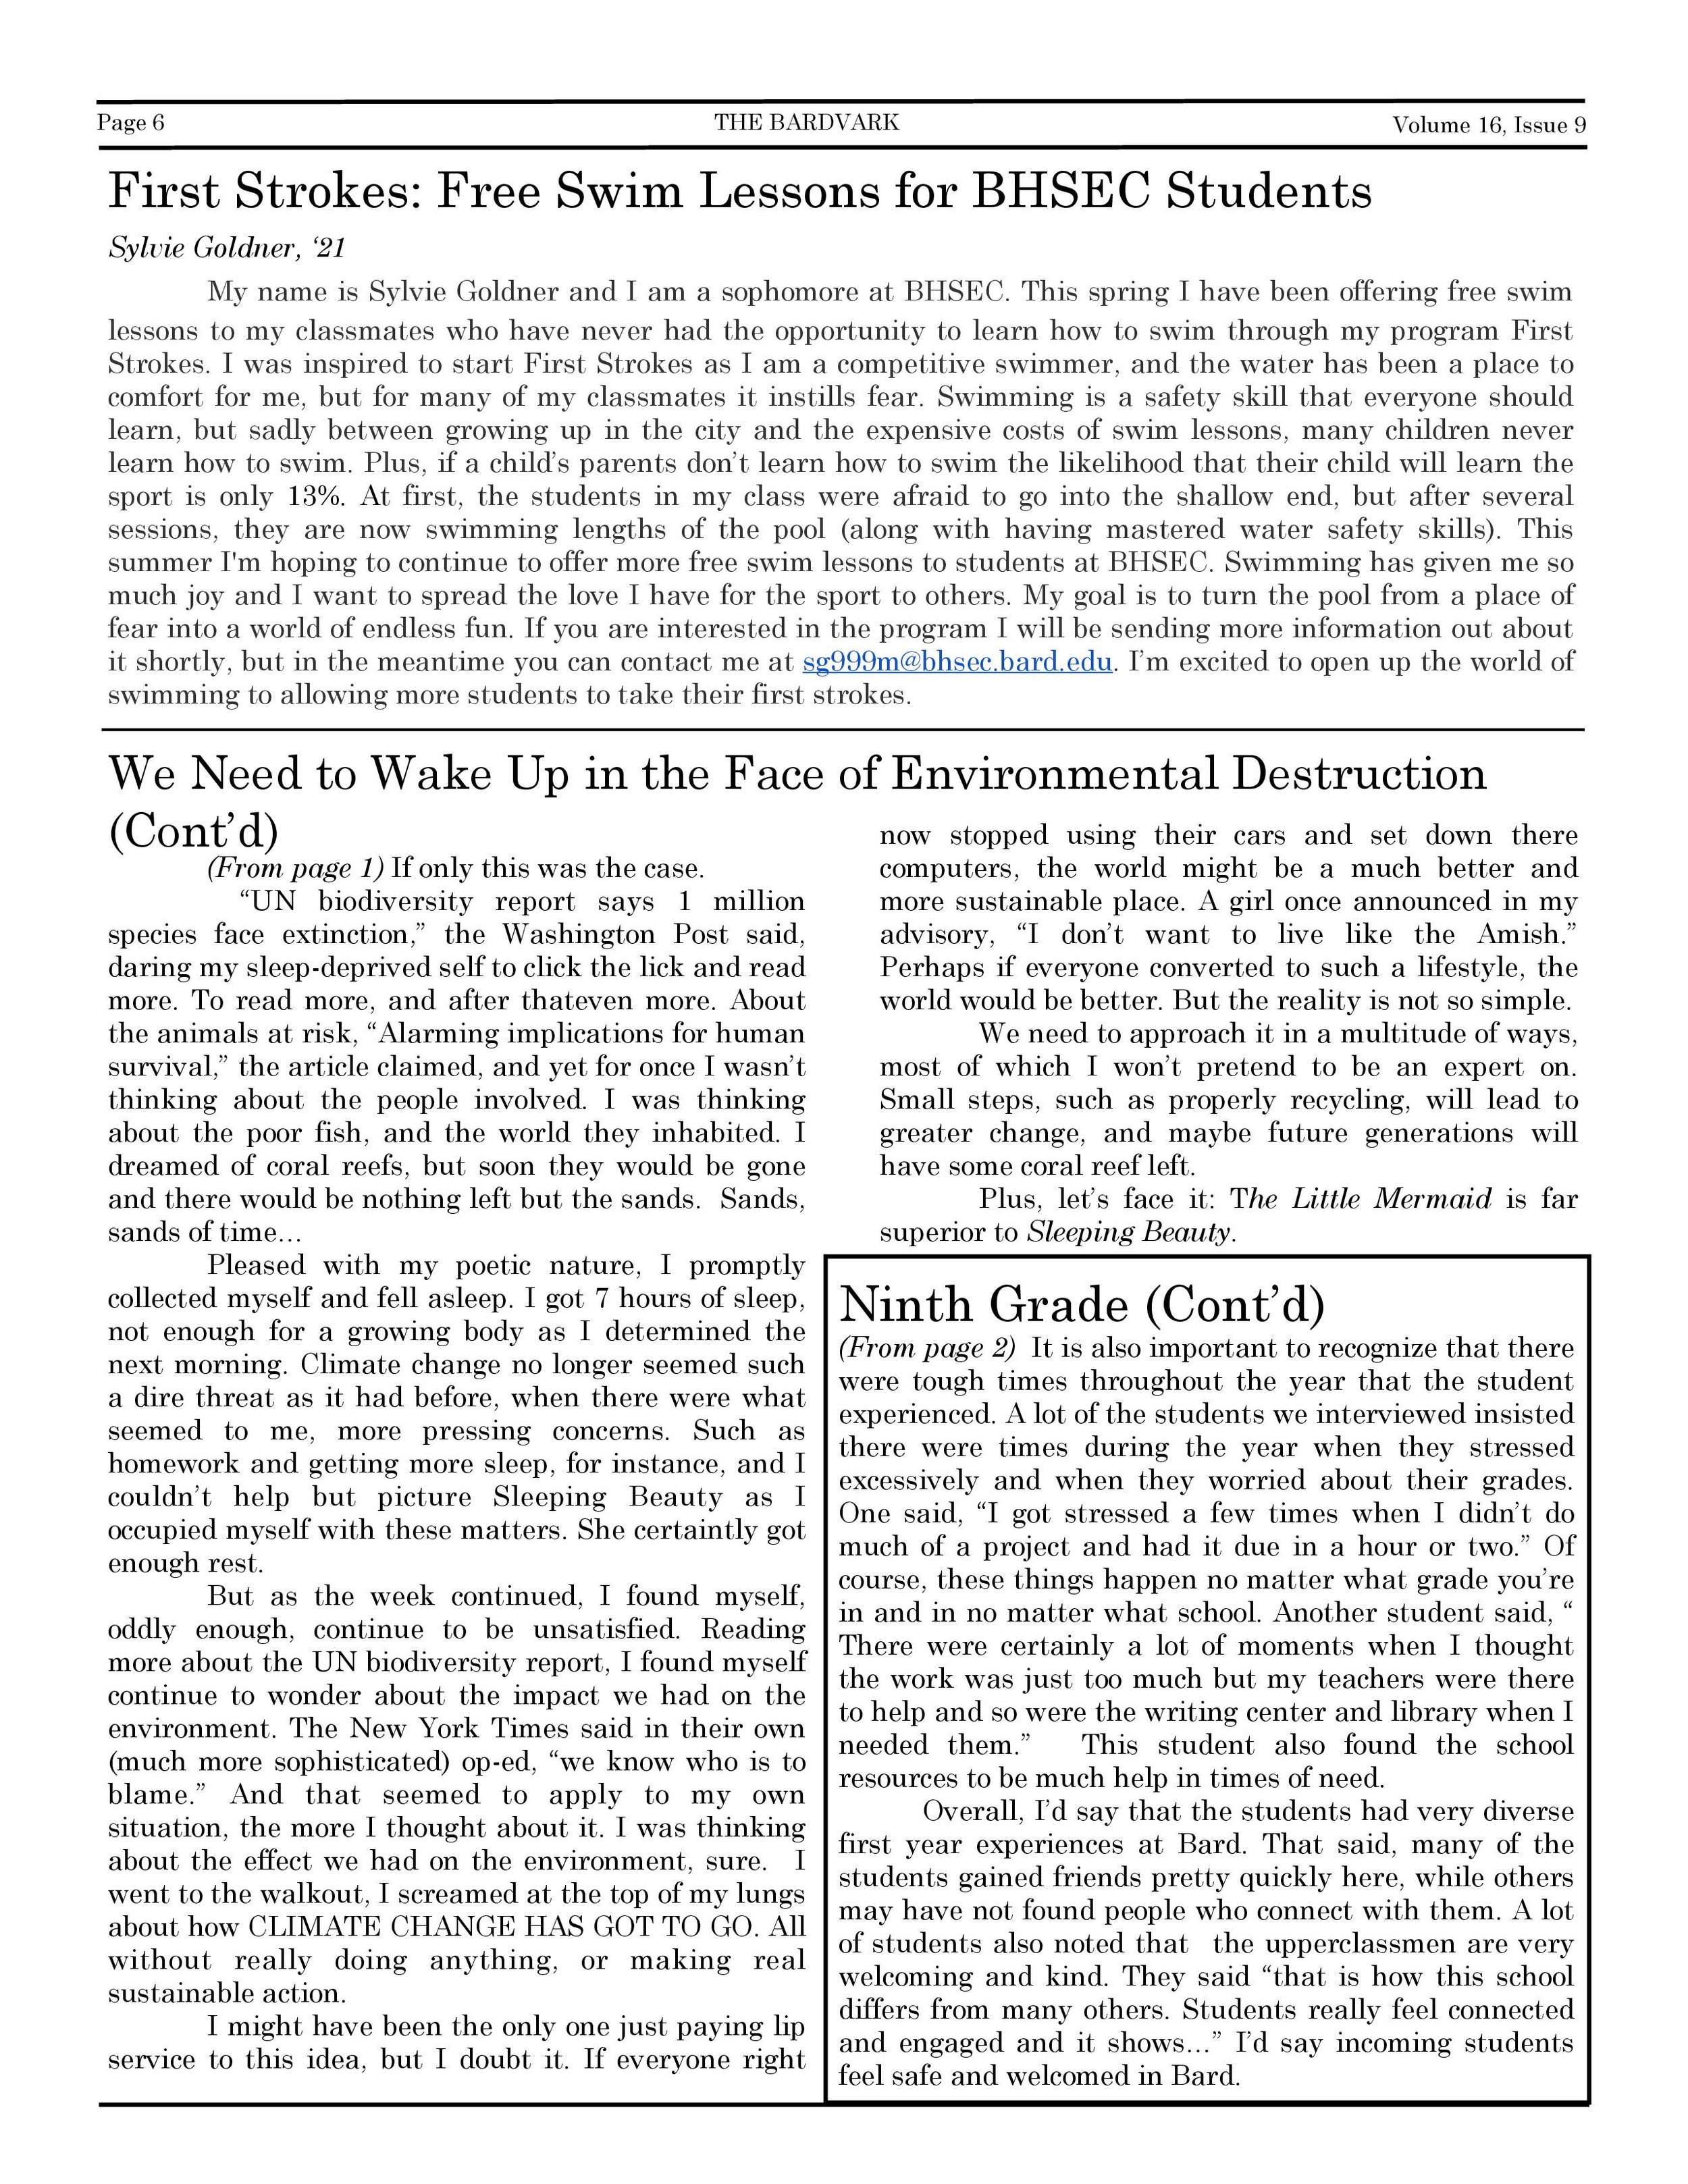 Issue 9 May 2019-6.jpg